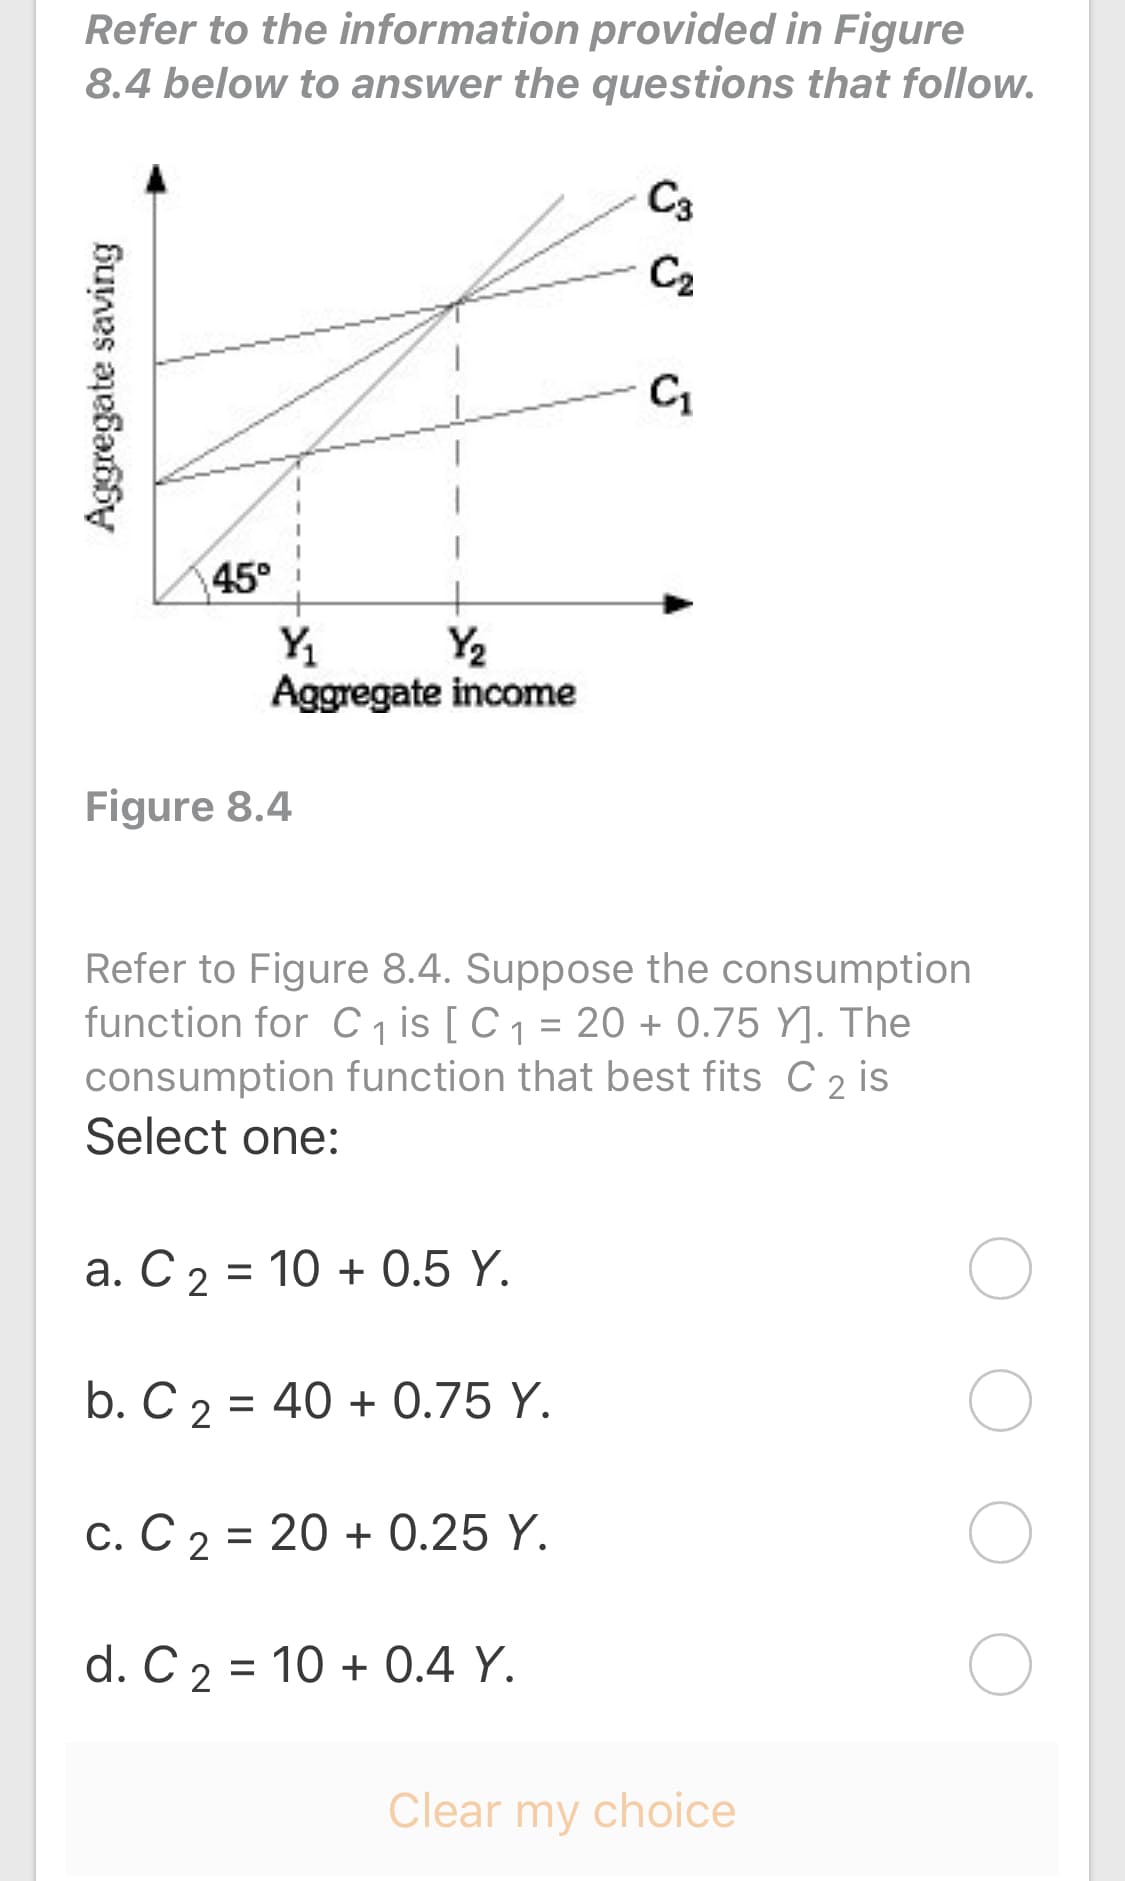 Refer to the information provided in Figure
8.4 below to answer the questions that follow.
C3
C2
C1
45°
Y2
Y
Aggregate income
Figure 8.4
Refer to Figure 8.4. Suppose the consumption
function for C , is [C1 = 20 + 0.75 Y]. The
consumption function that best fits C 2 is
Select one:
a. C 2 = 10 + 0.5 Y.
b. C 2 = 40 + 0.75 Y.
c. C 2 = 20 + 0.25 Y.
d. C 2 = 10 + 0.4 Y.
Aggregate saving
o o
